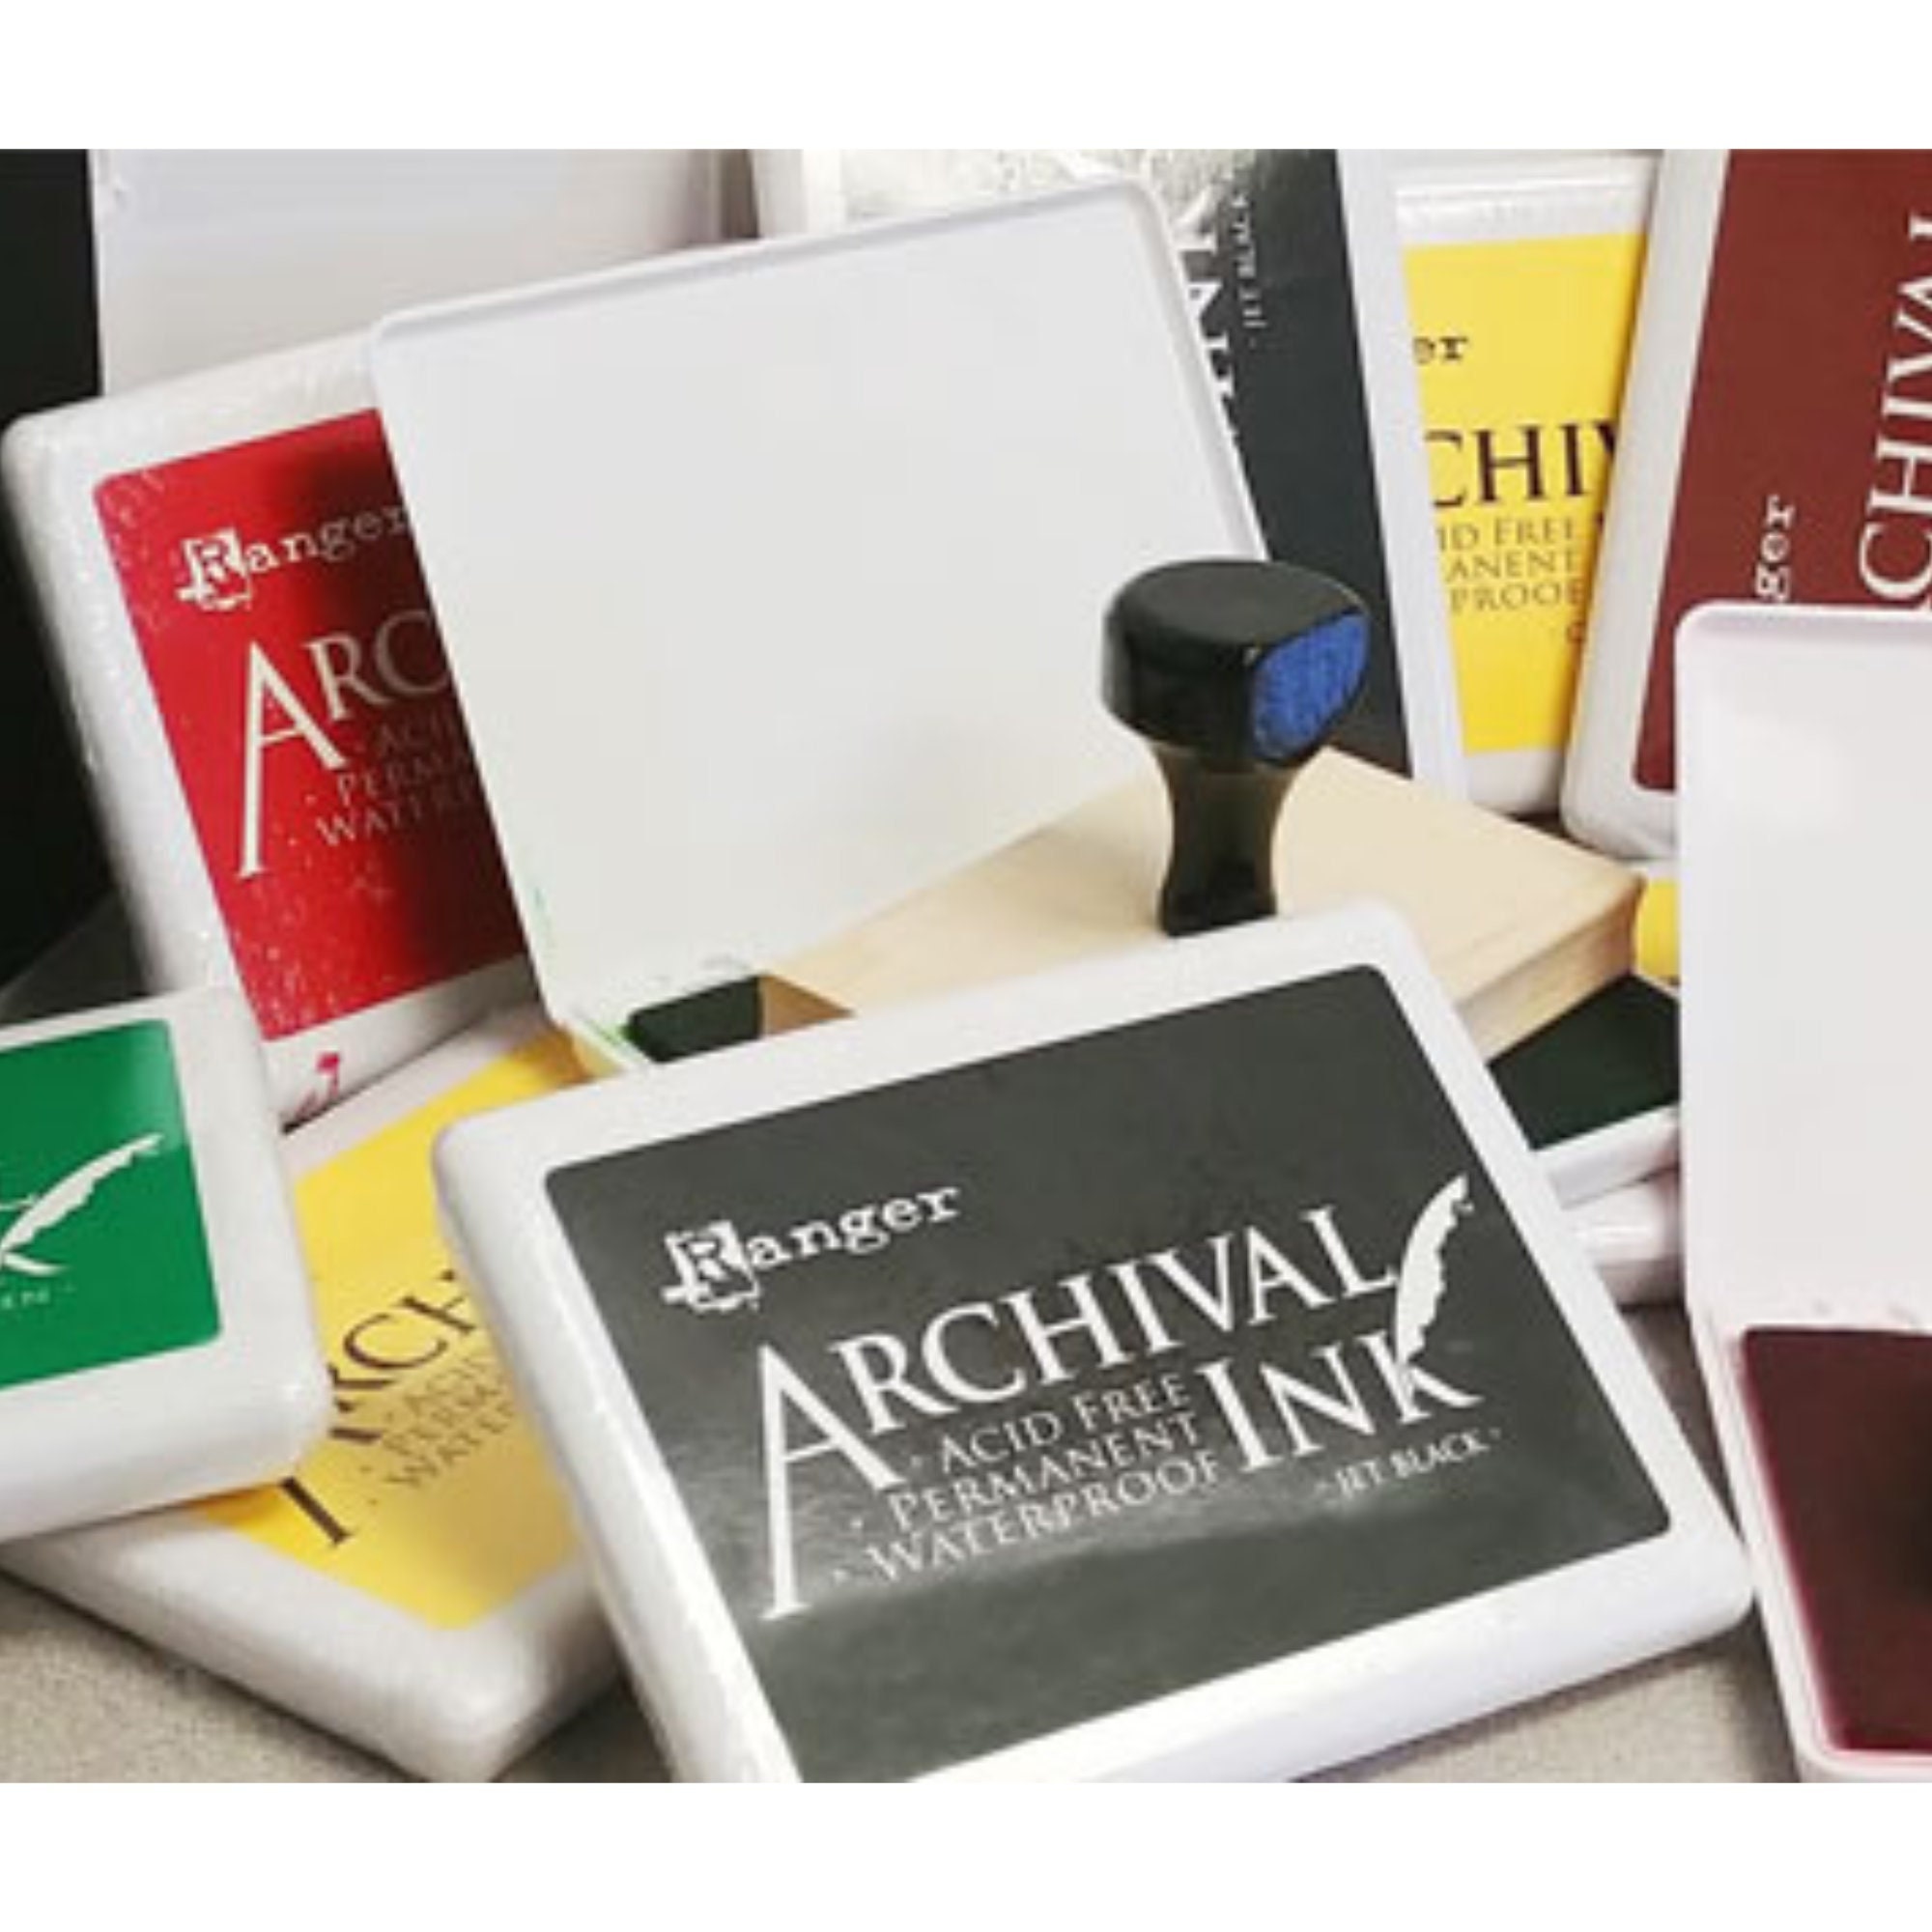  Ranger Archival Vermillion Red Permanent Dye Ink Stamp Pad &  Re-Inker Refill : Arts, Crafts & Sewing